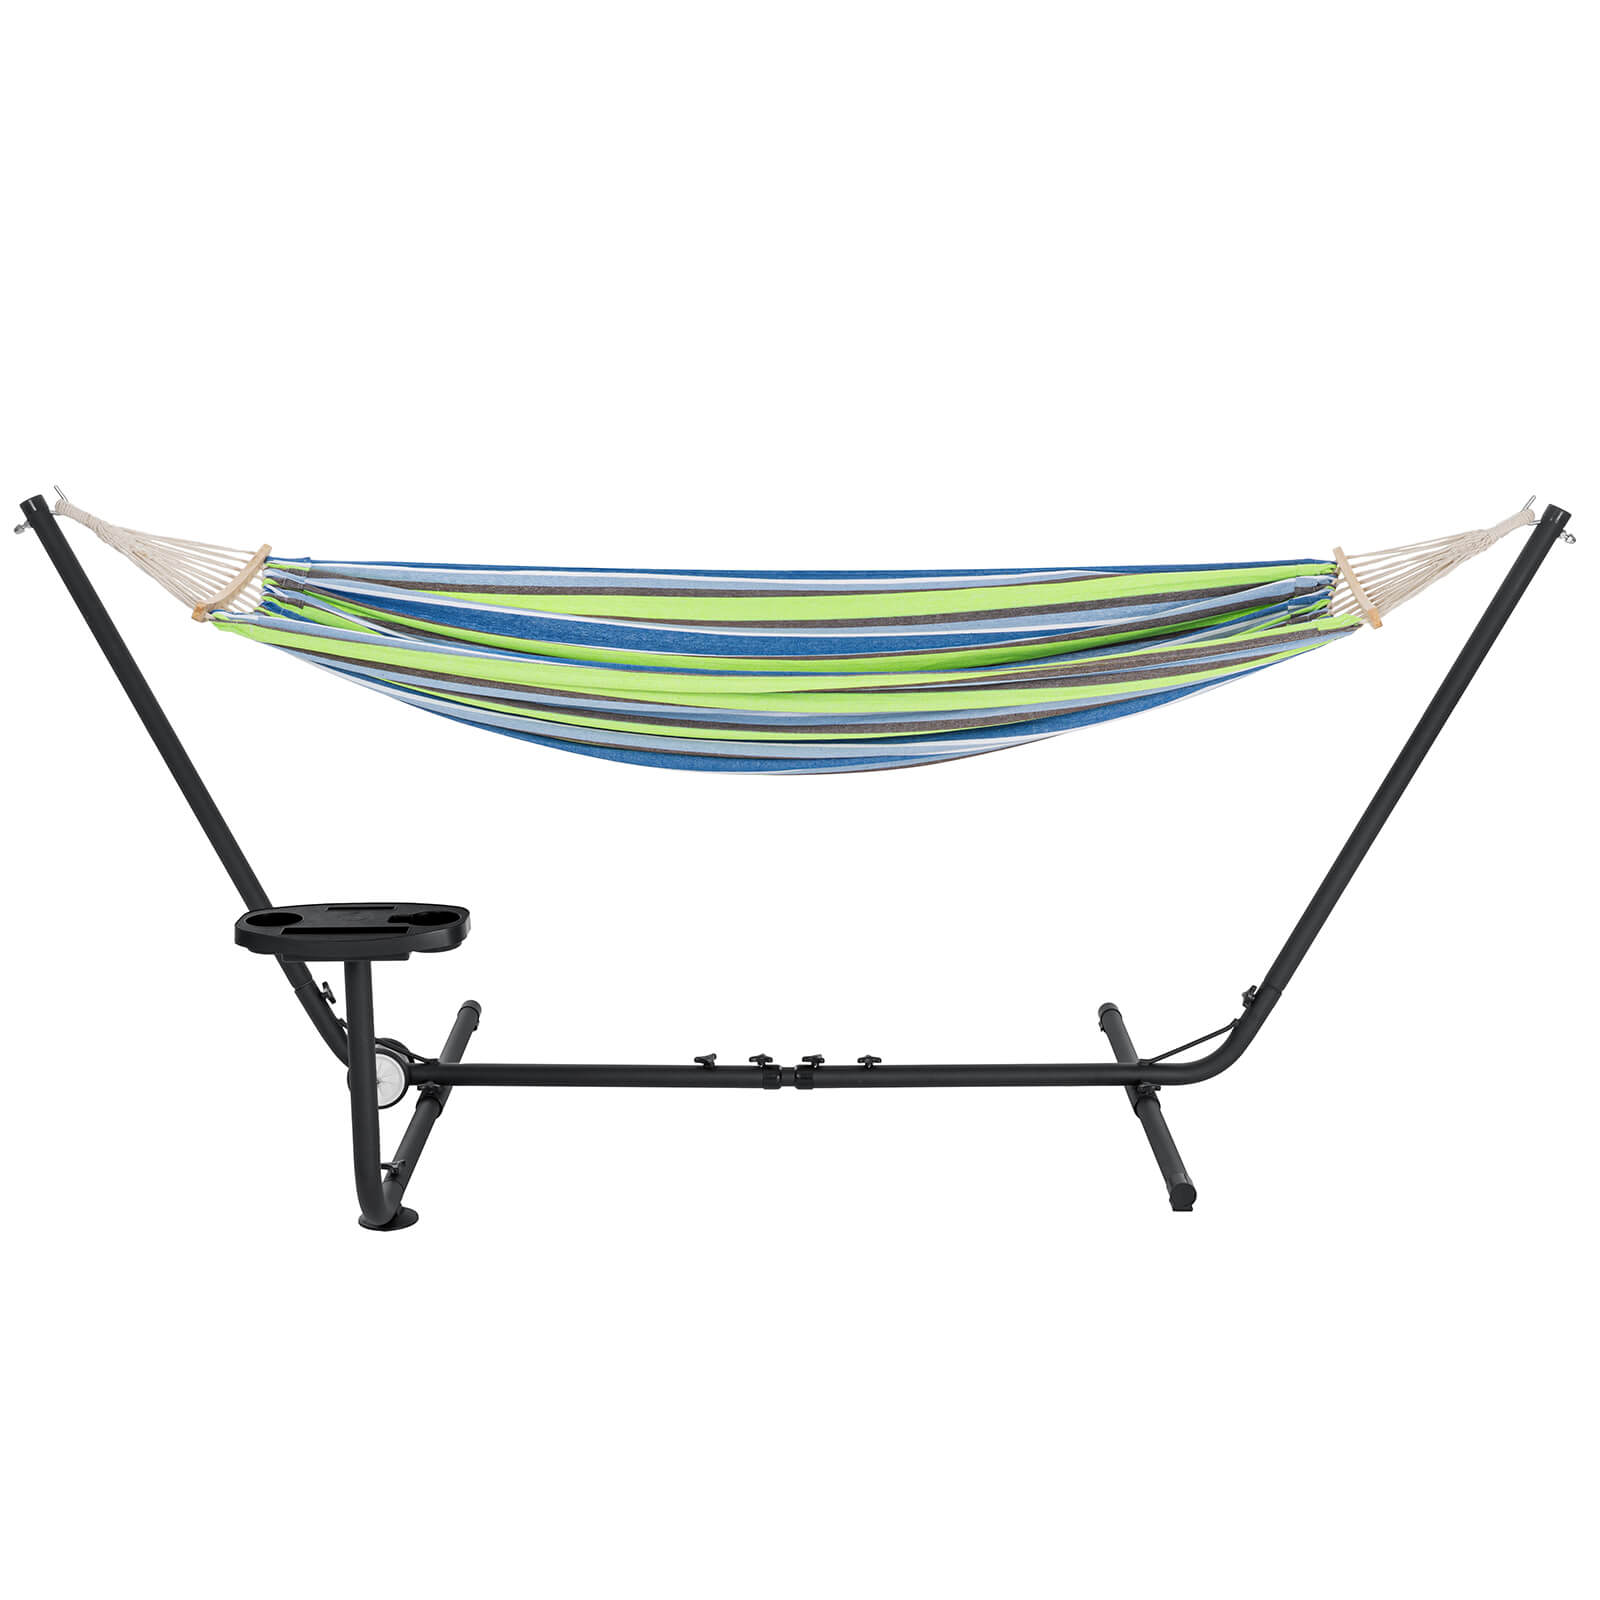 Hammock with Stand Included Two Person Free Standing Hammock with Heavy Duty Steel Stand and Carrying Bag for Outdoor Indoor Garden Yard 330lbs Weight Capacity Blue